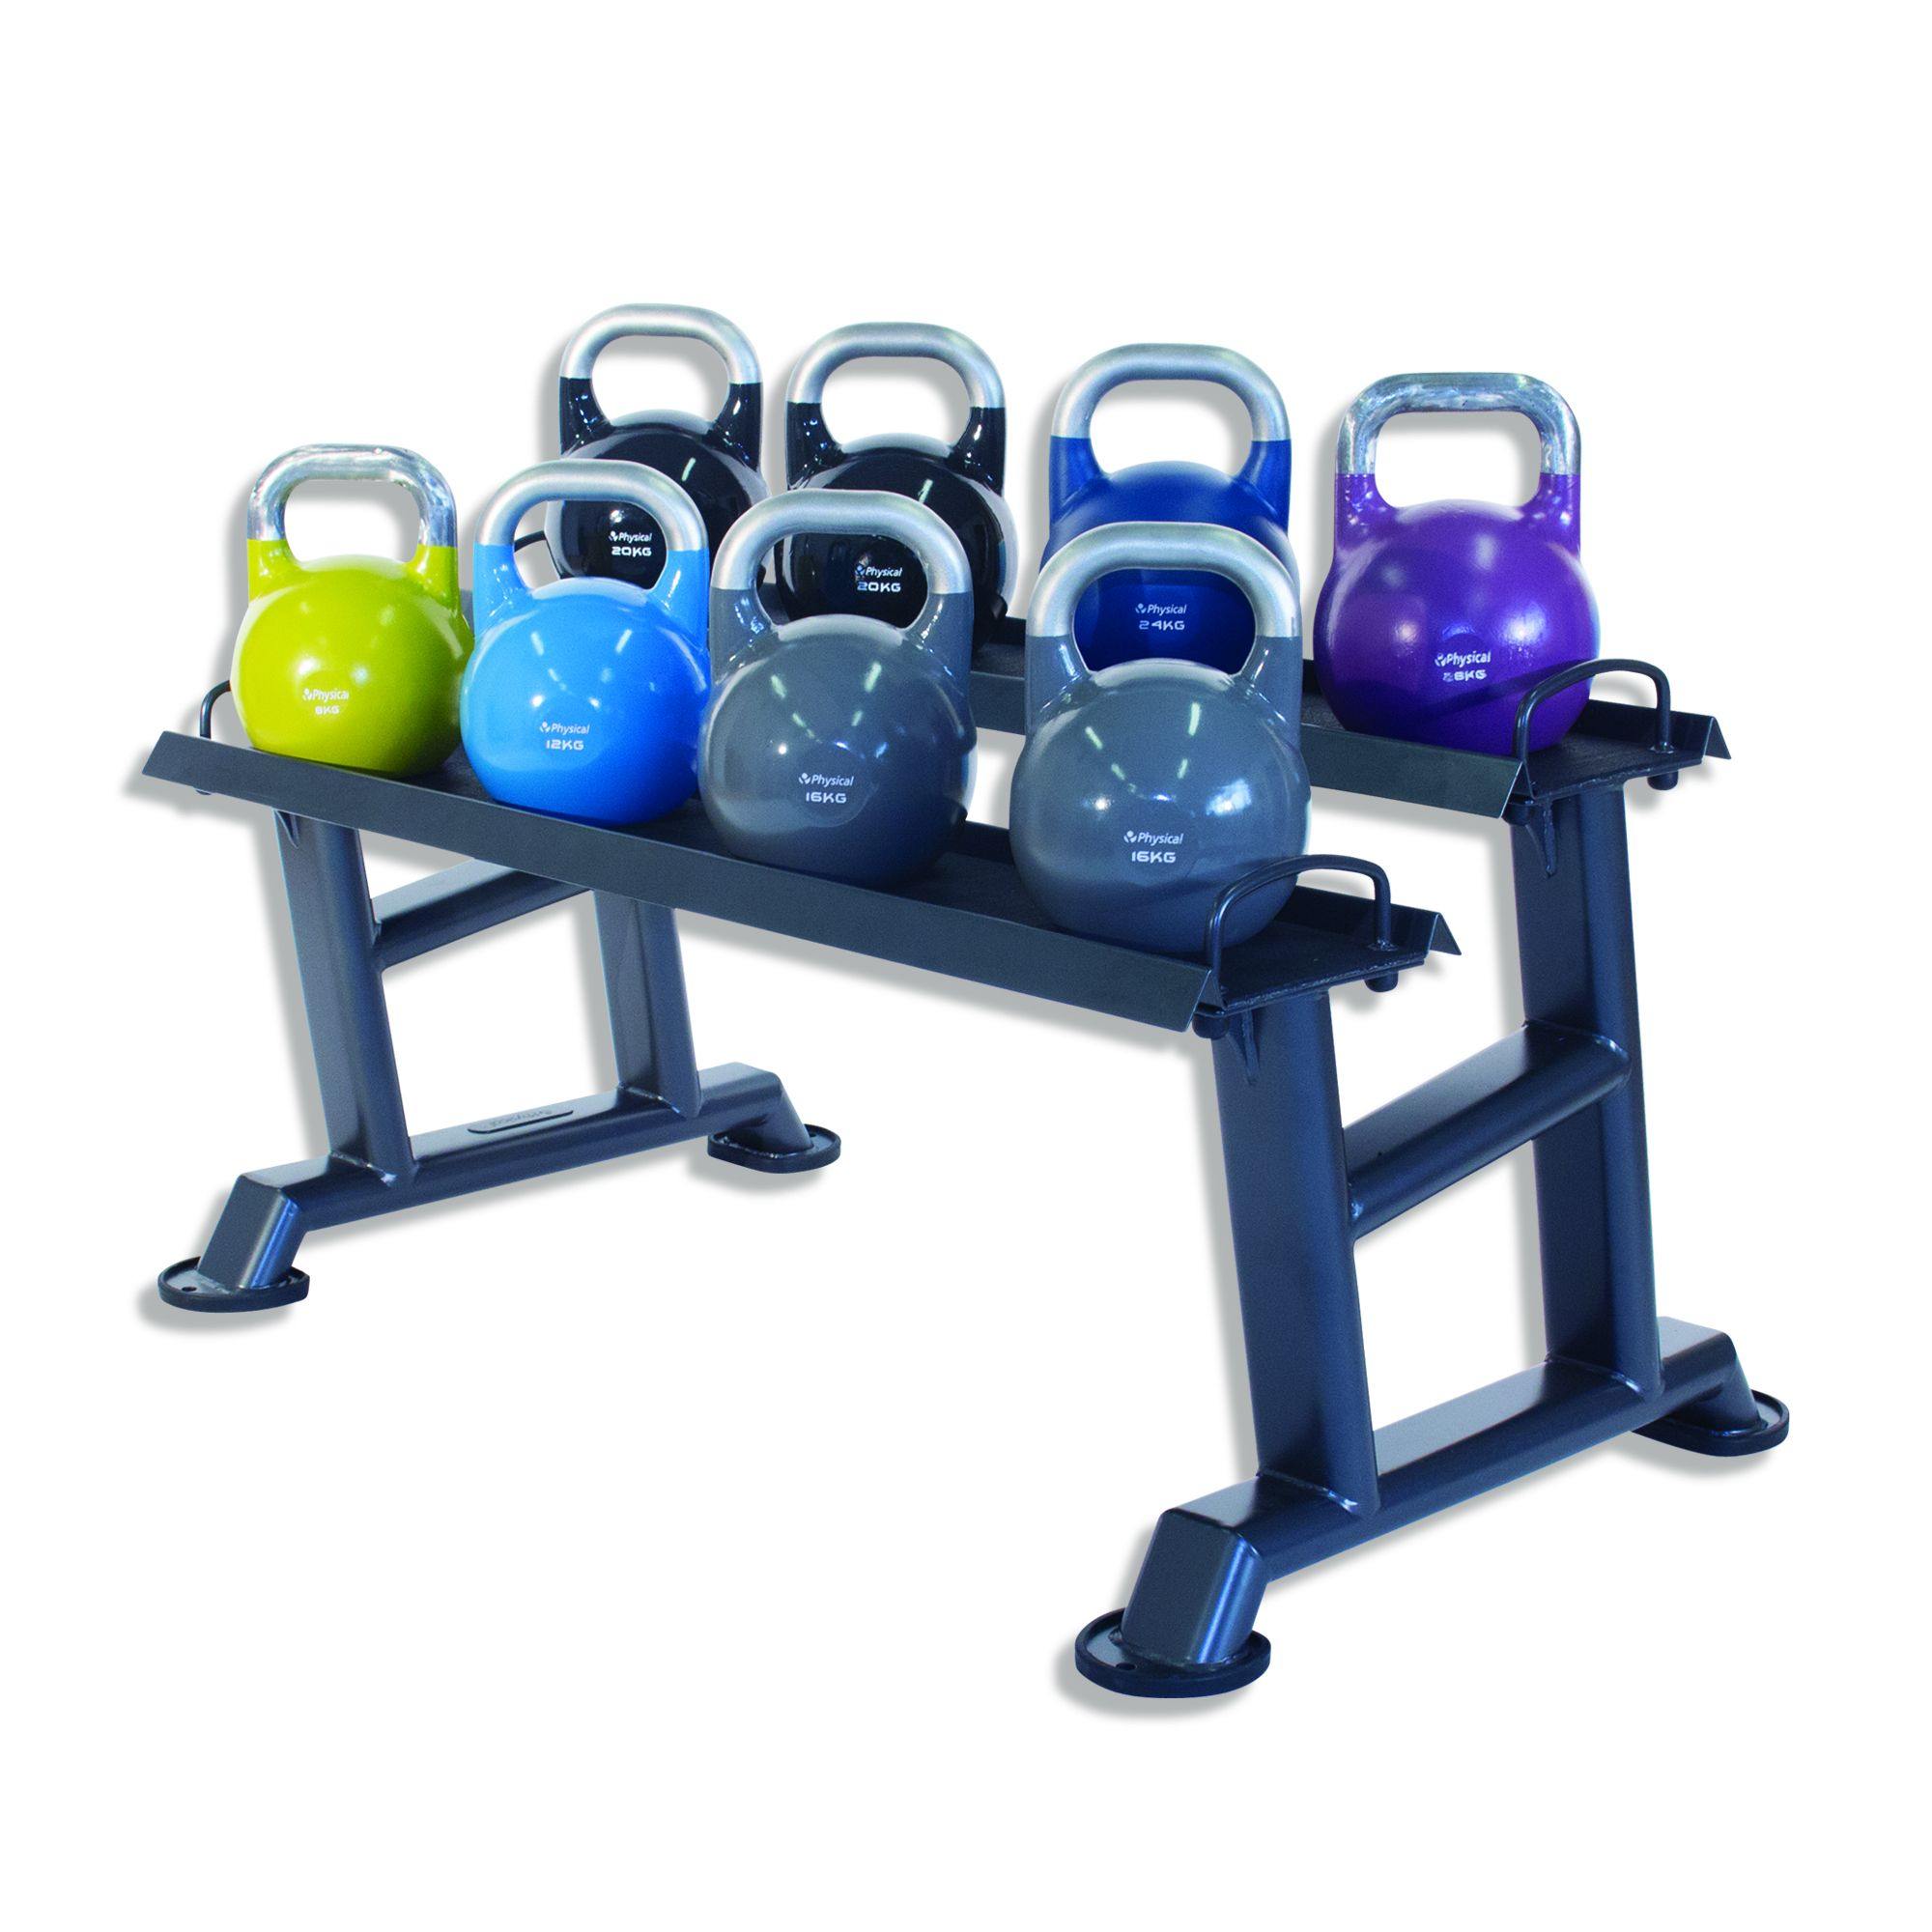 Physical Company Kettlebell Storage Rack - Holds up to 12 Kettlebells